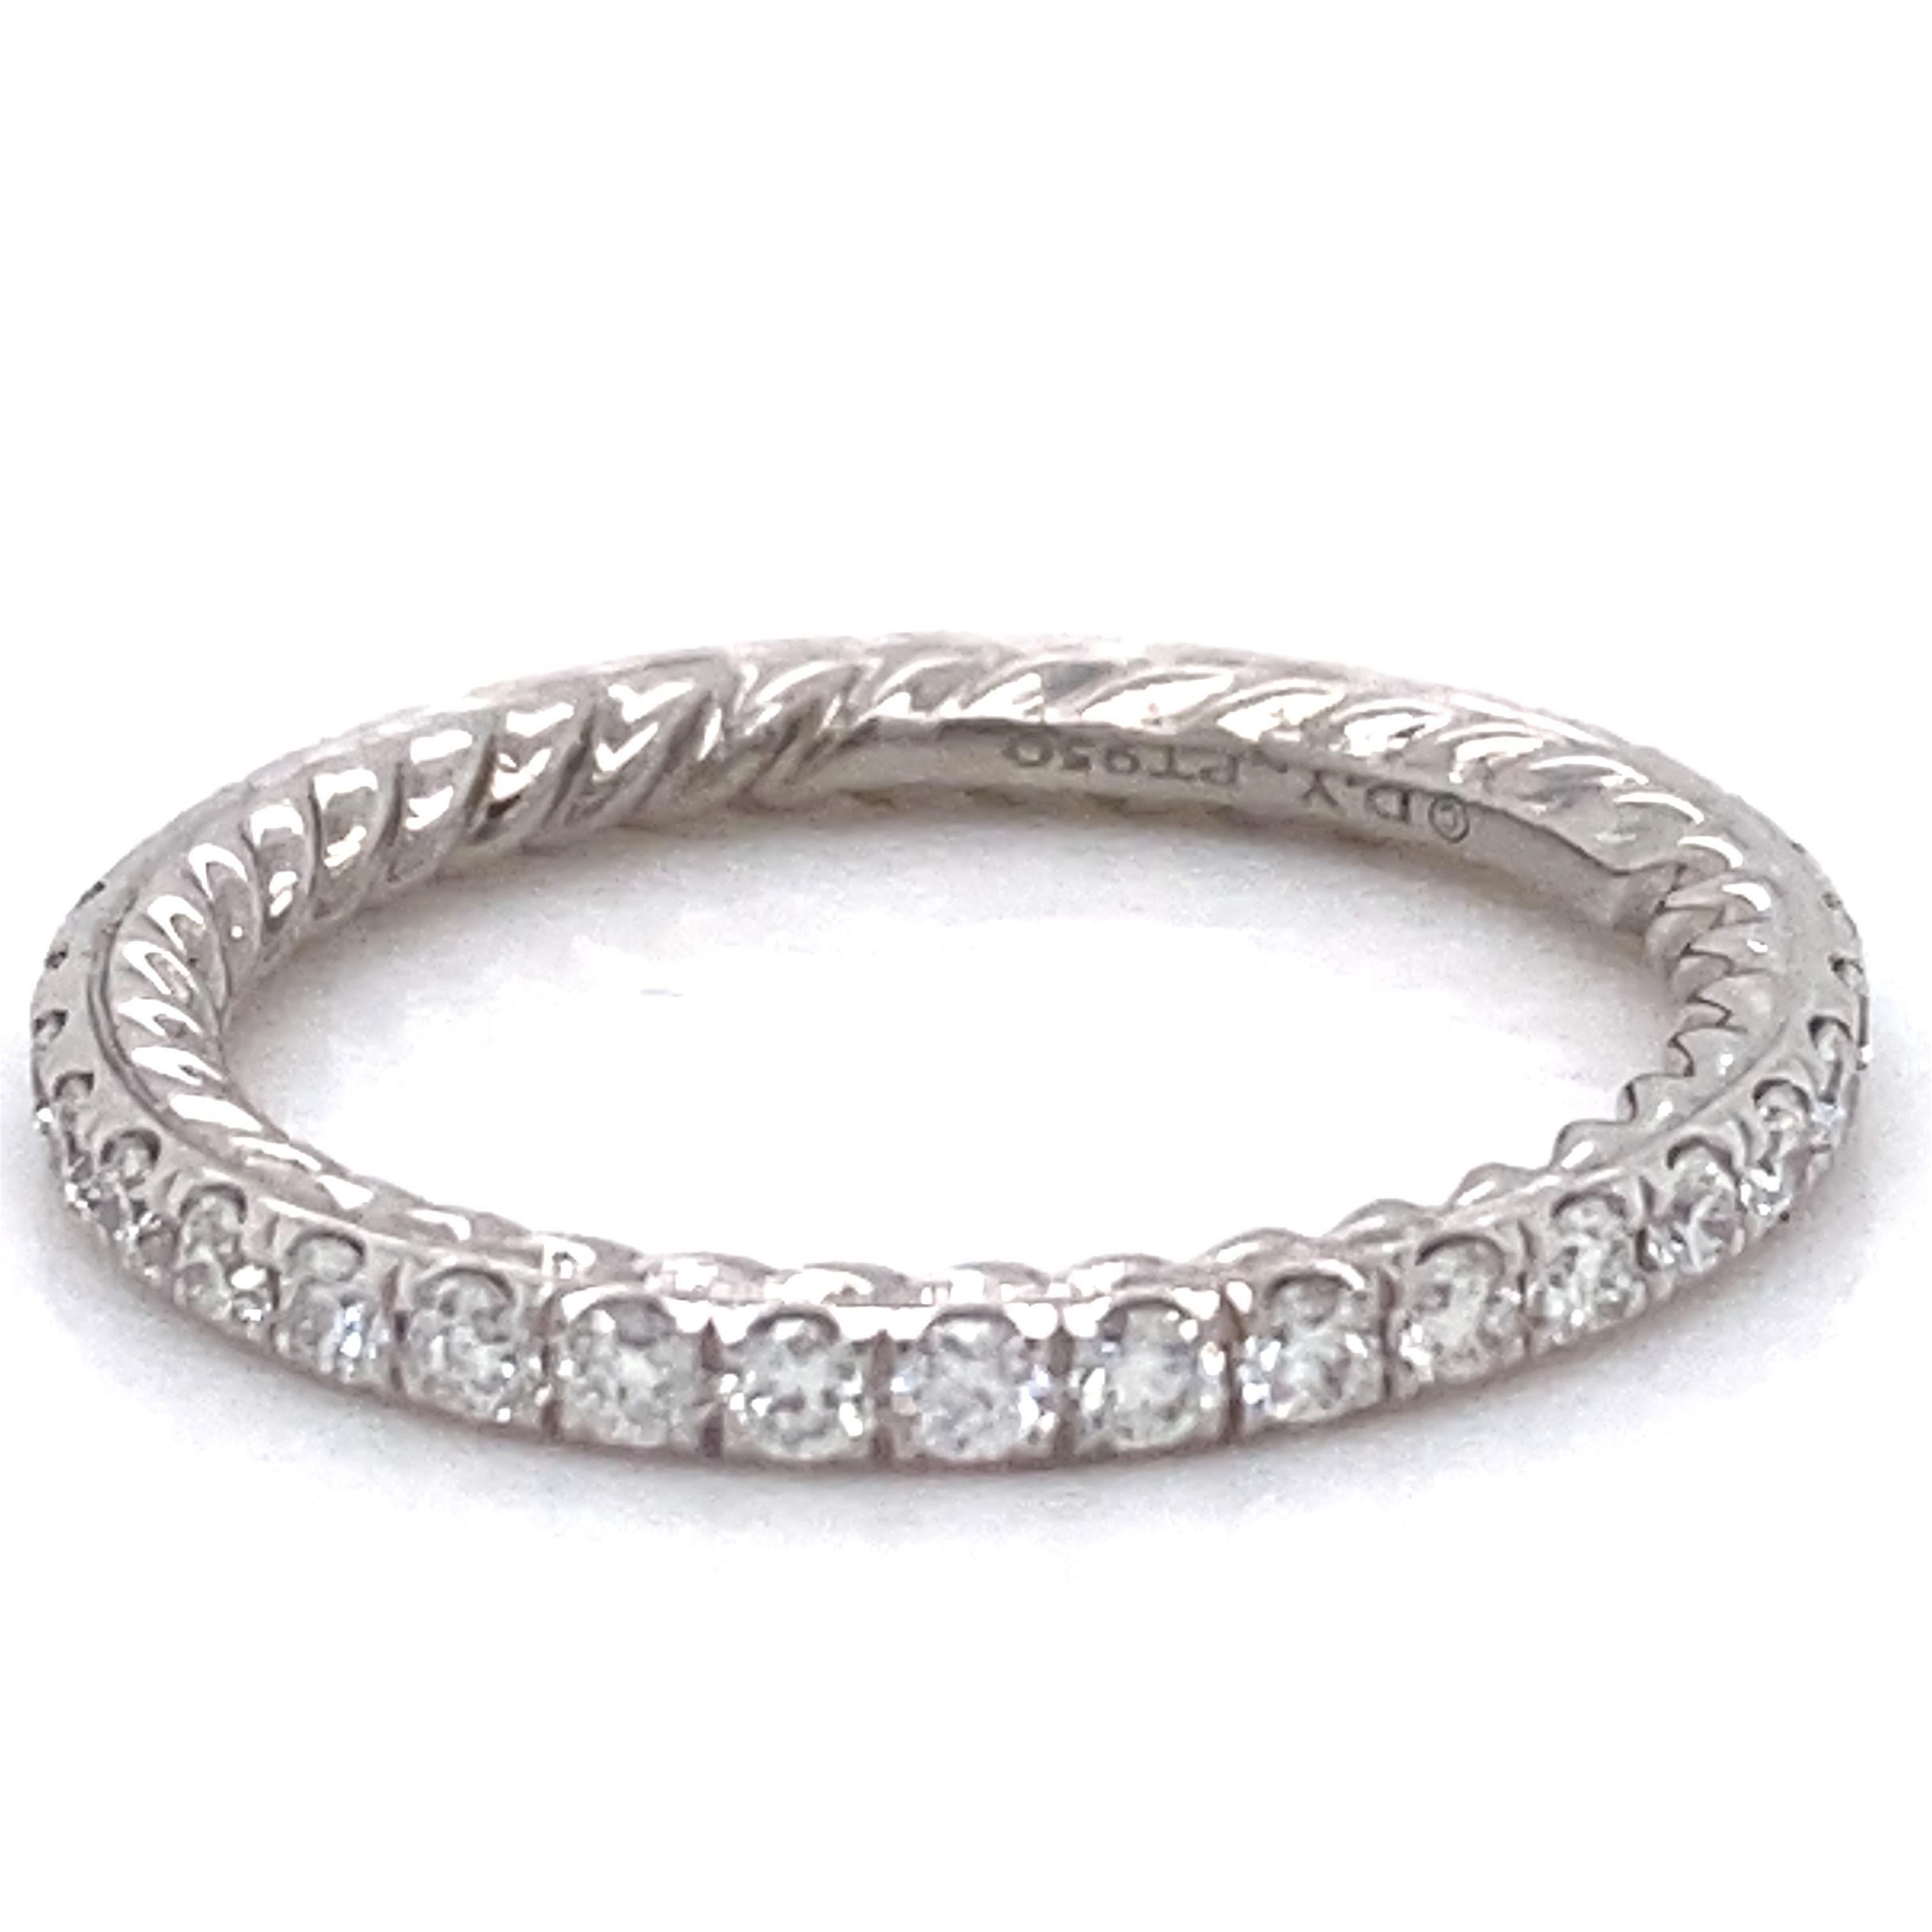 DAVID YURMAN EDEN Single Row Eternity Diamond Wedding Band 

In this streamlined band, sculptural metal and discreet Cable detailing create a sensuous effect while elegantly symbolizing the union of two lives.

Metal:  Platinum
Diamonds:  Pavé